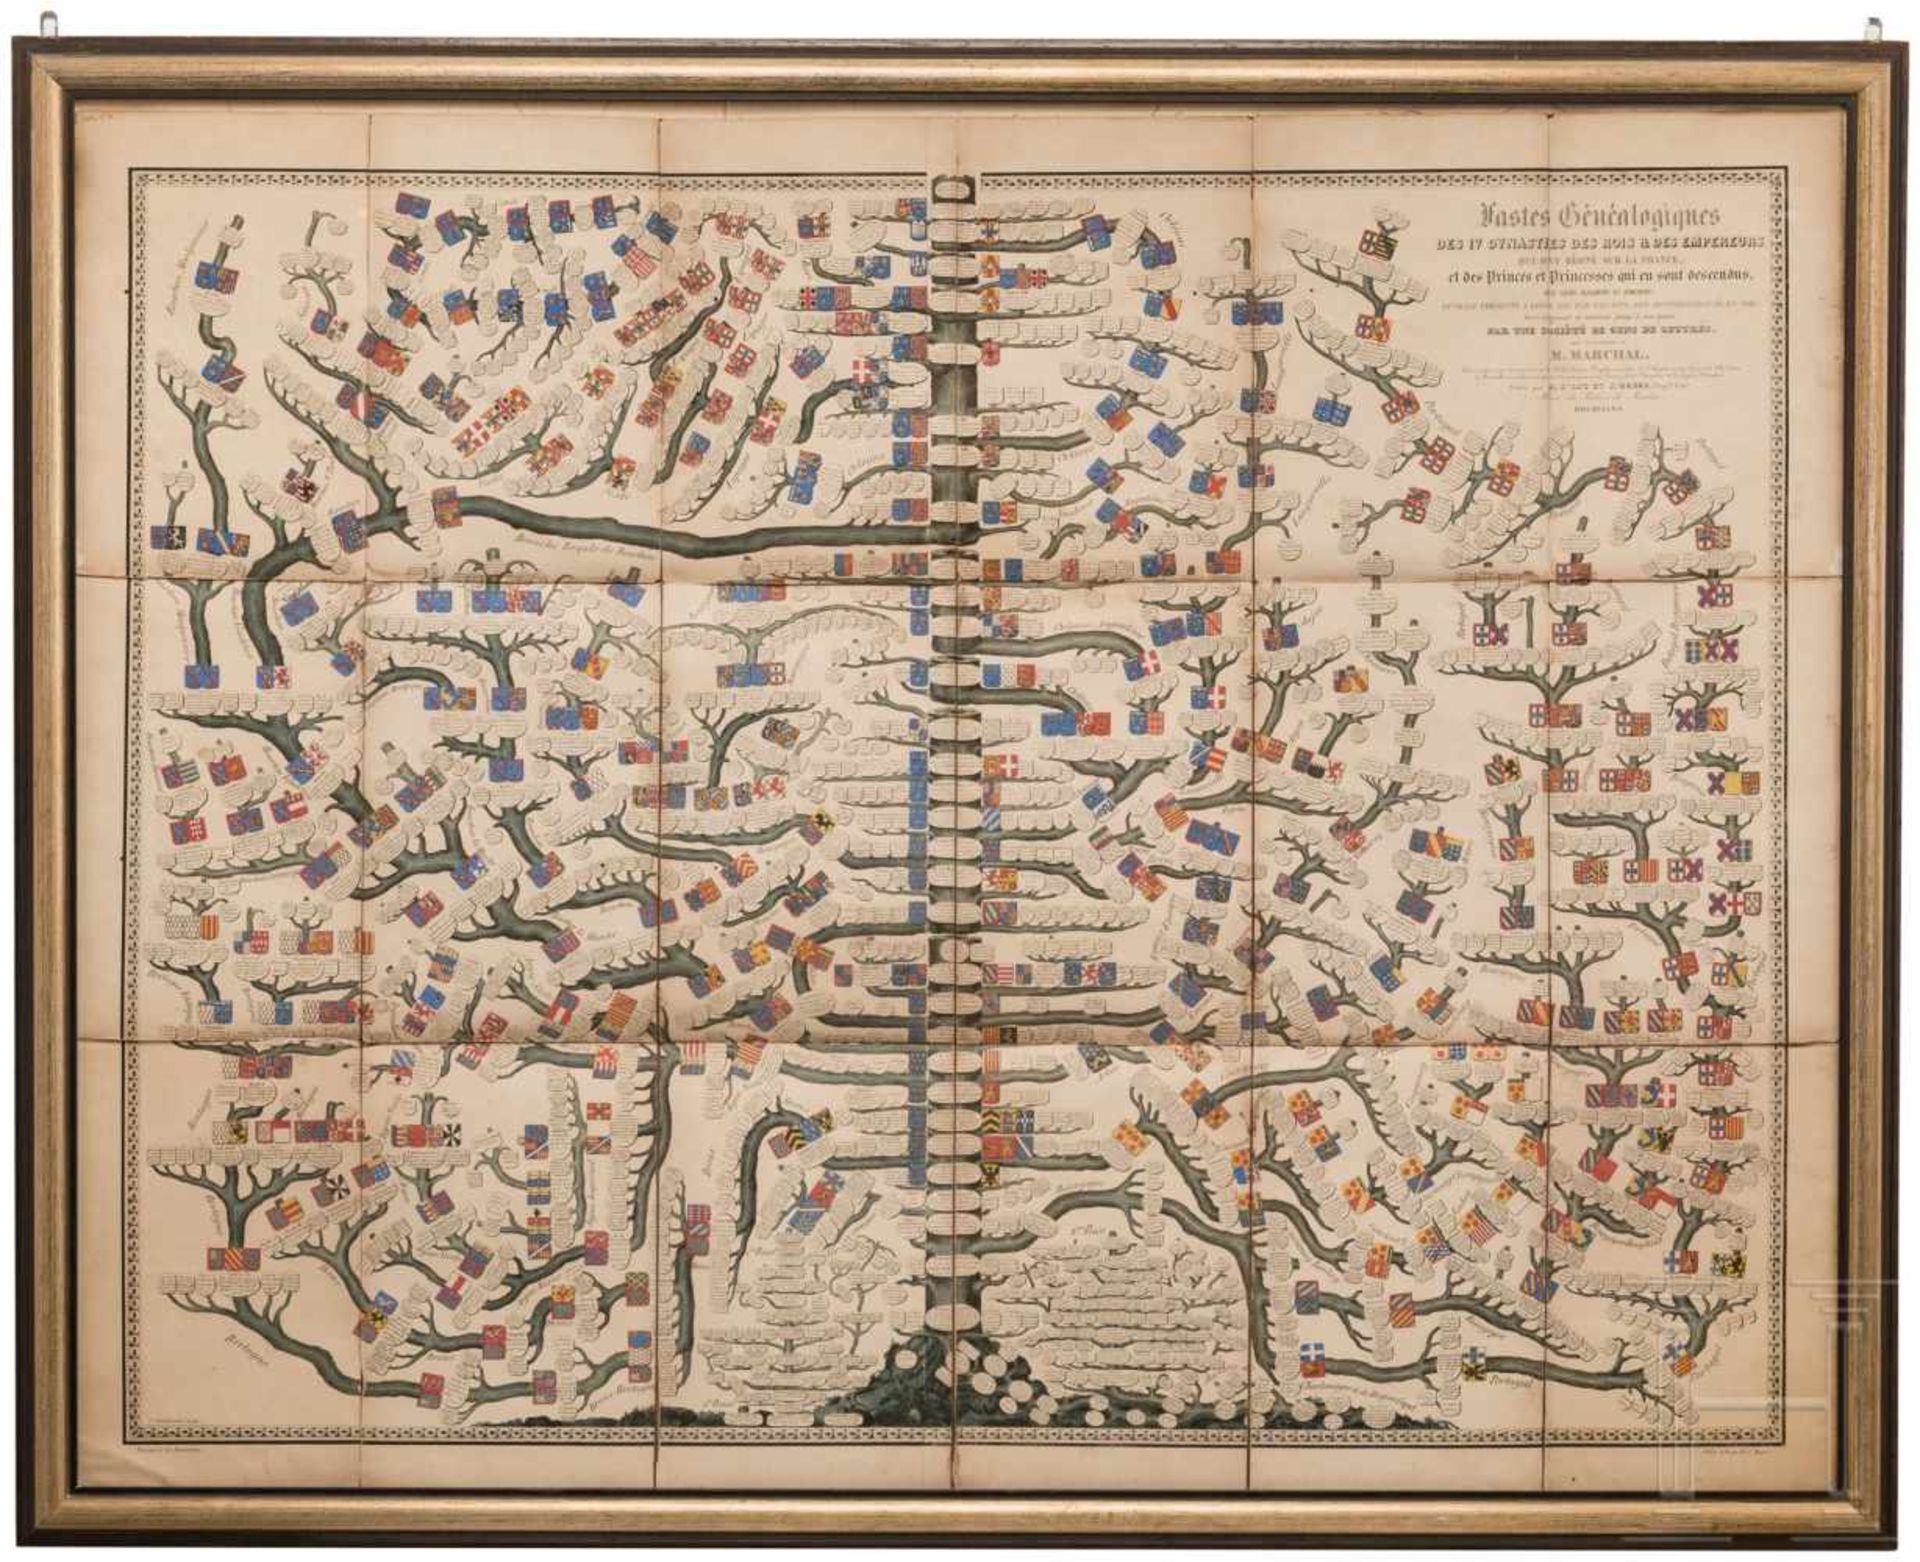 Large family tree of the French kings, mid 19th centuryPapier, farbig lithografiert, in der